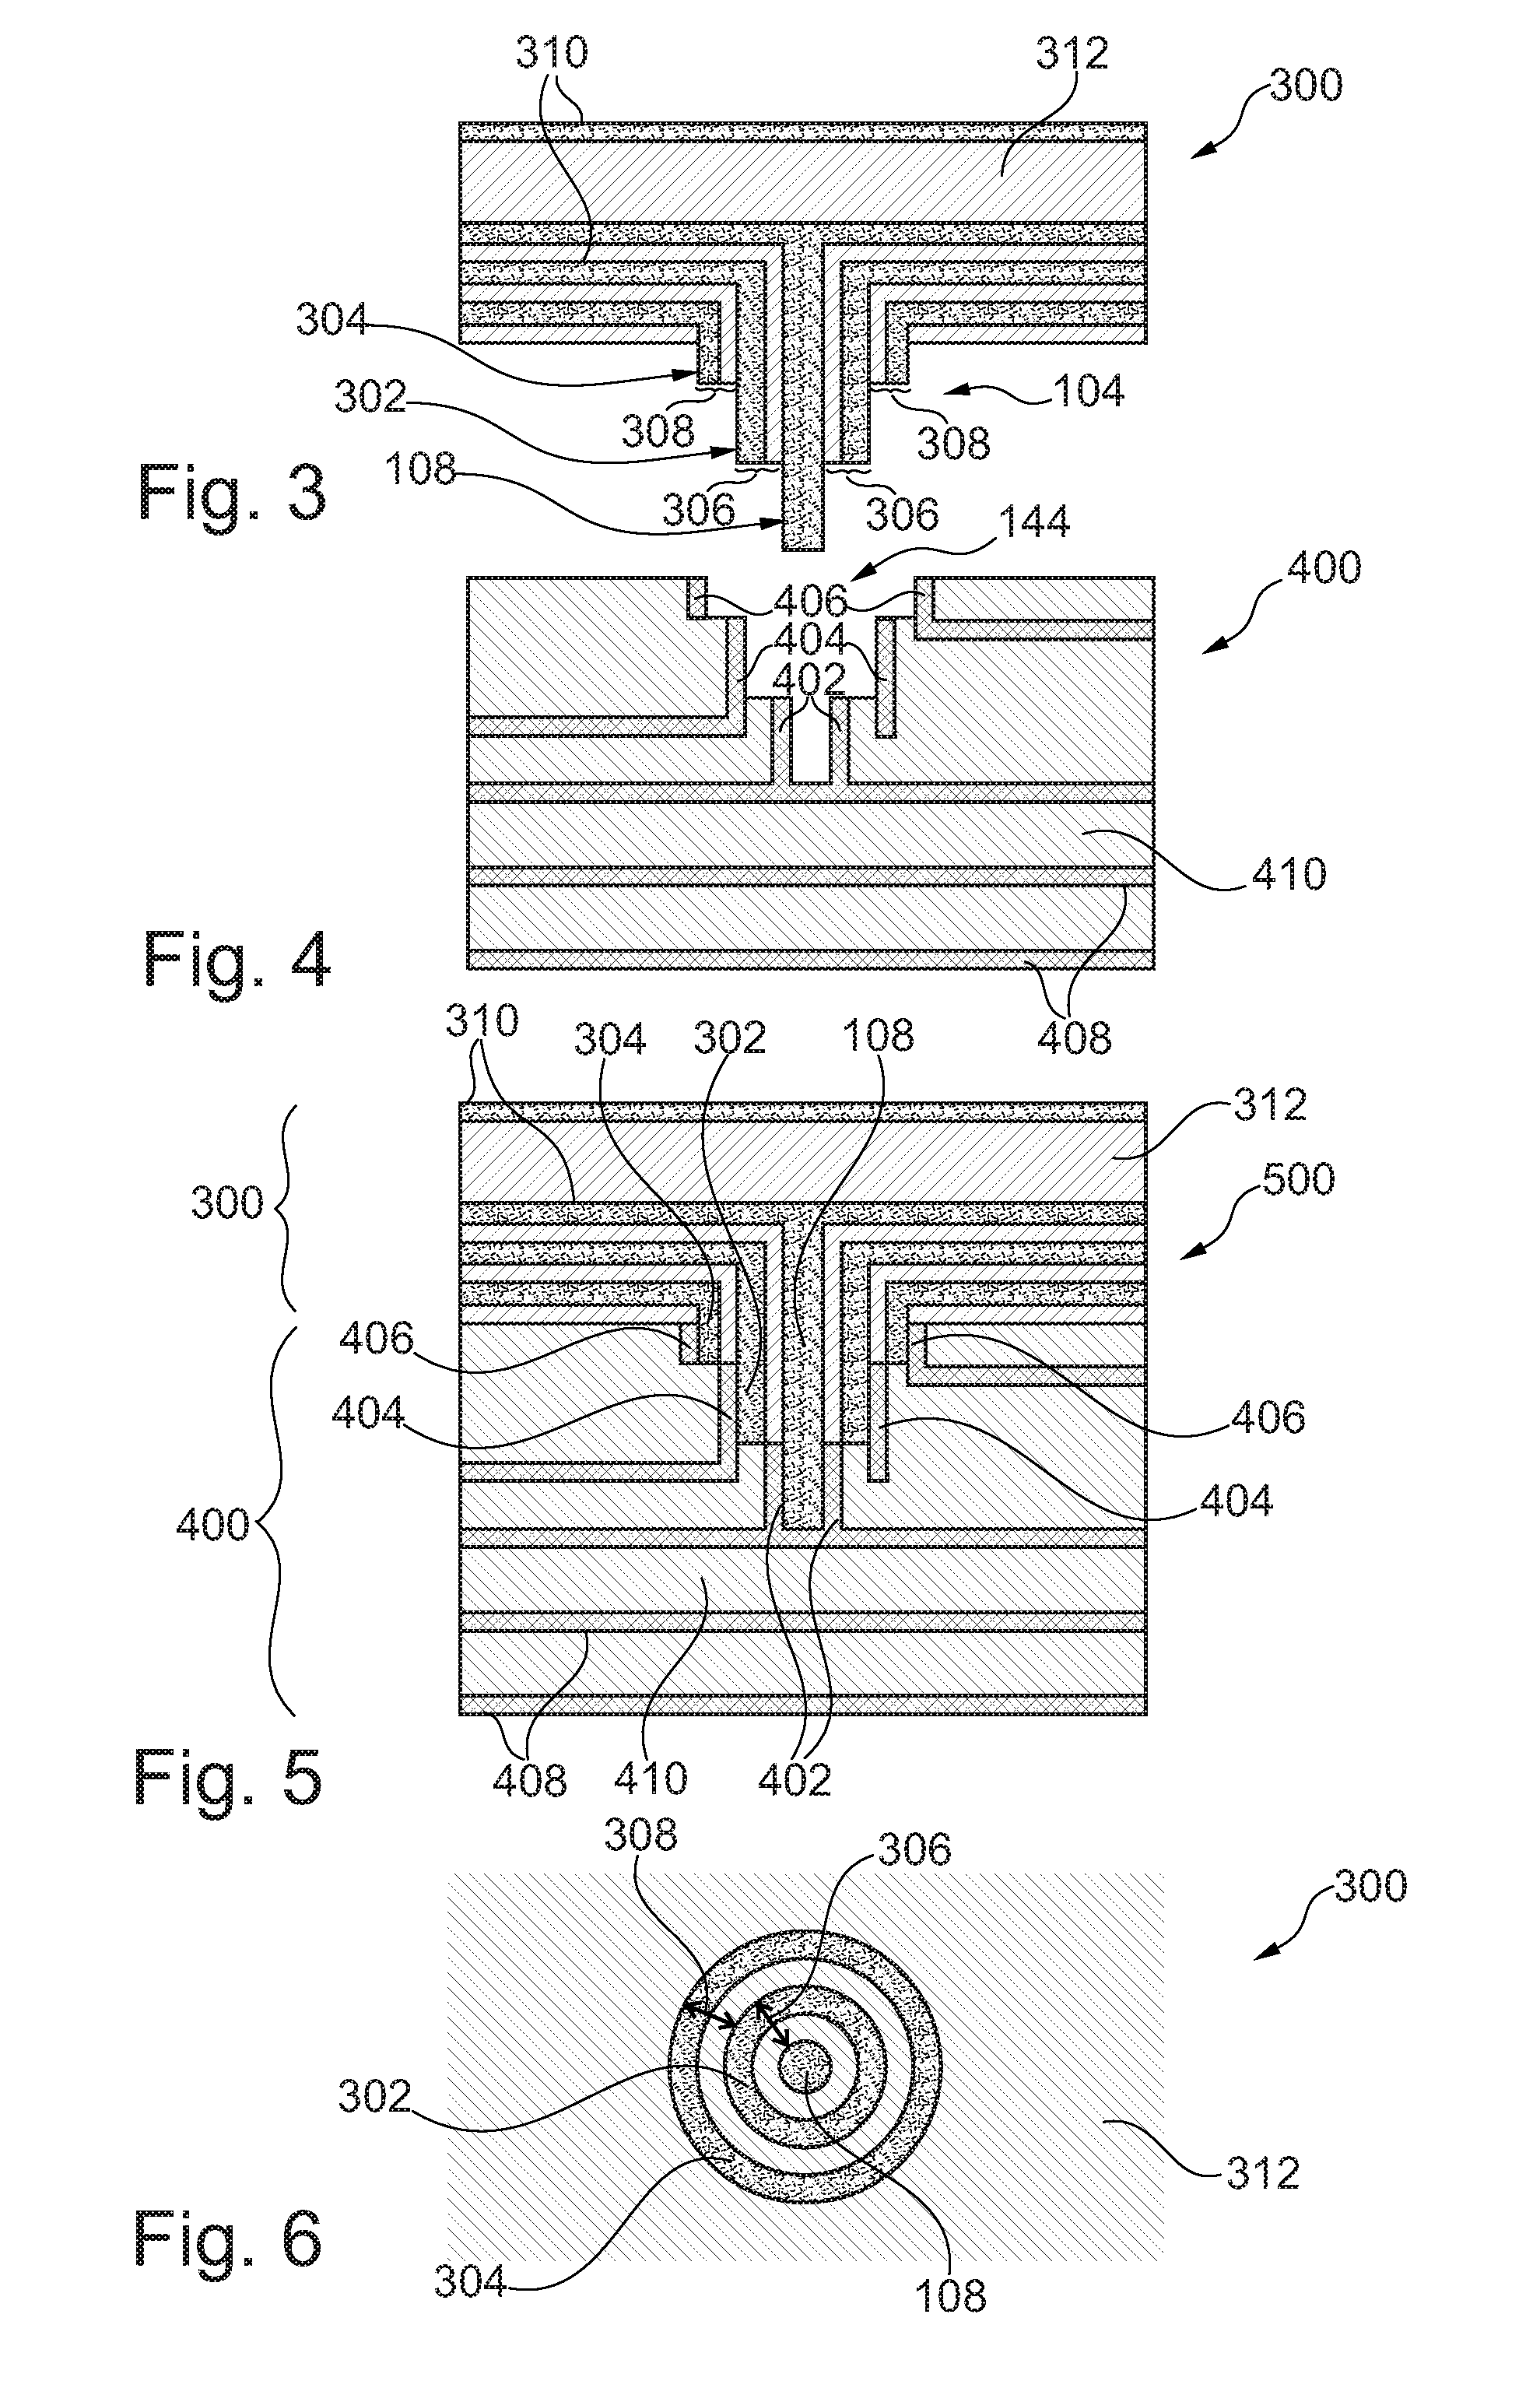 Multilevel interconnection system